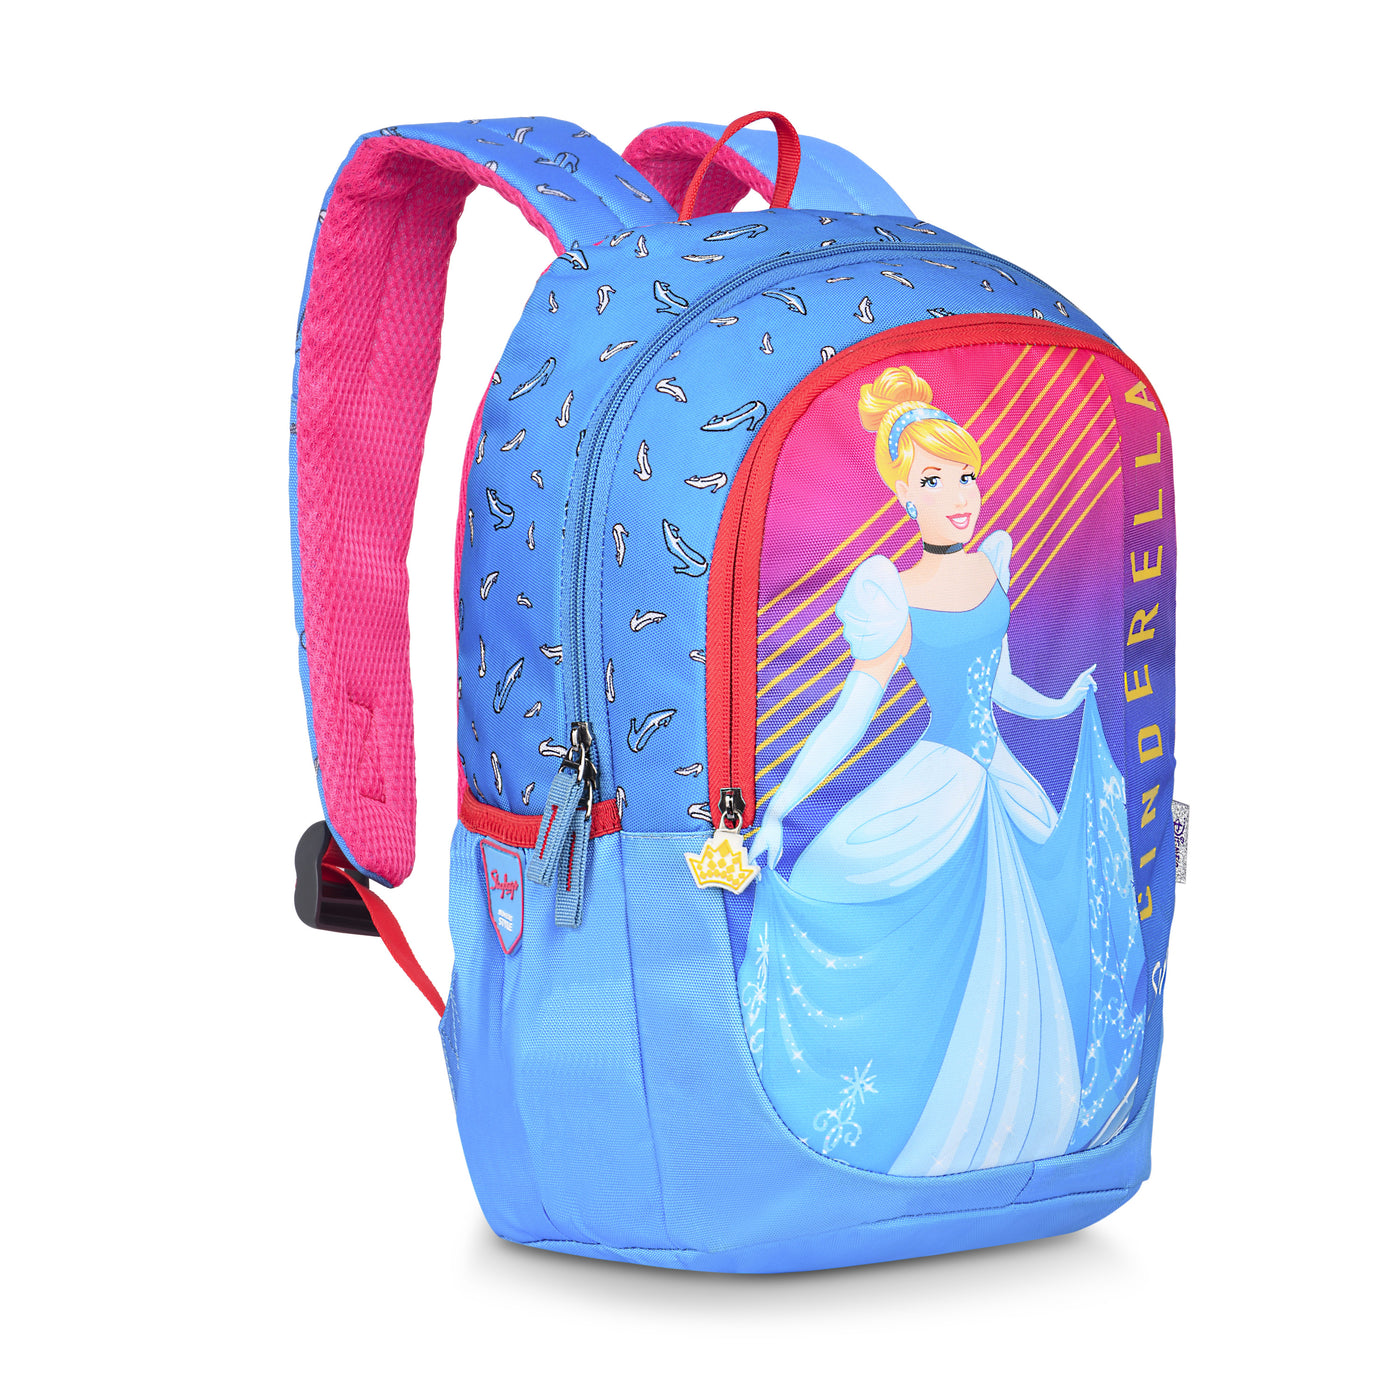 Skybags Cinderella Champ "01 School Backpack Blue"